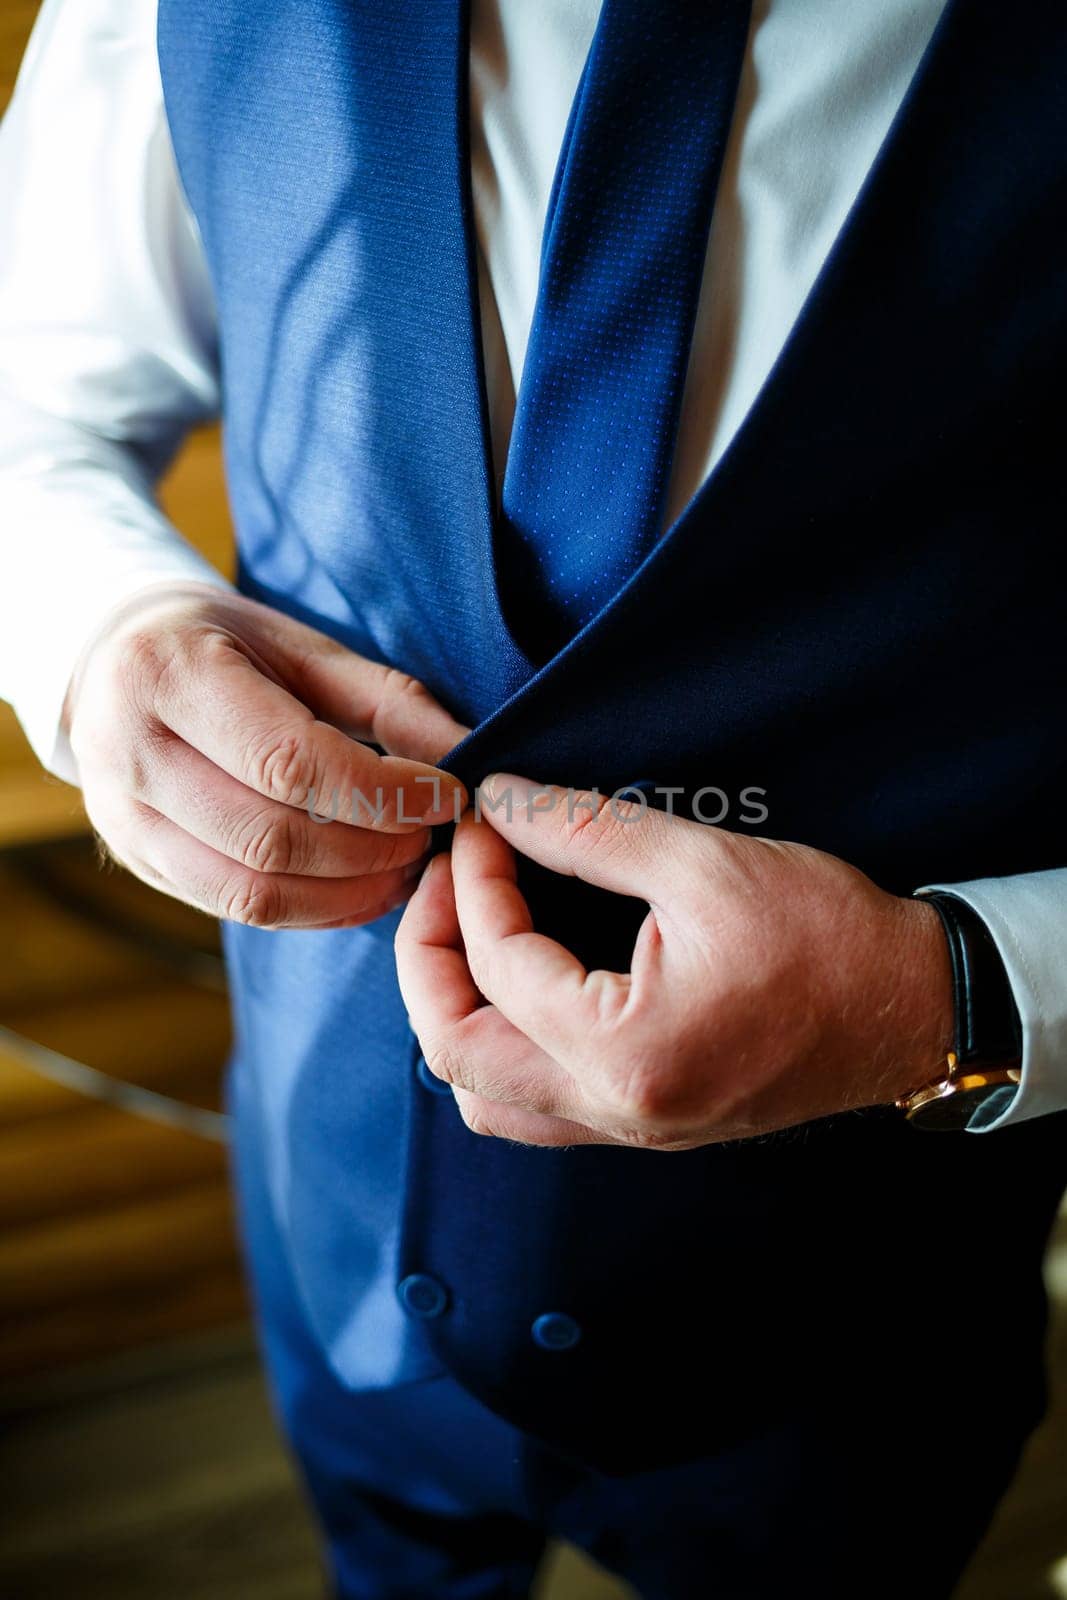 Man puts on a wedding suit and accessories on the wedding day. by Dmitrytph